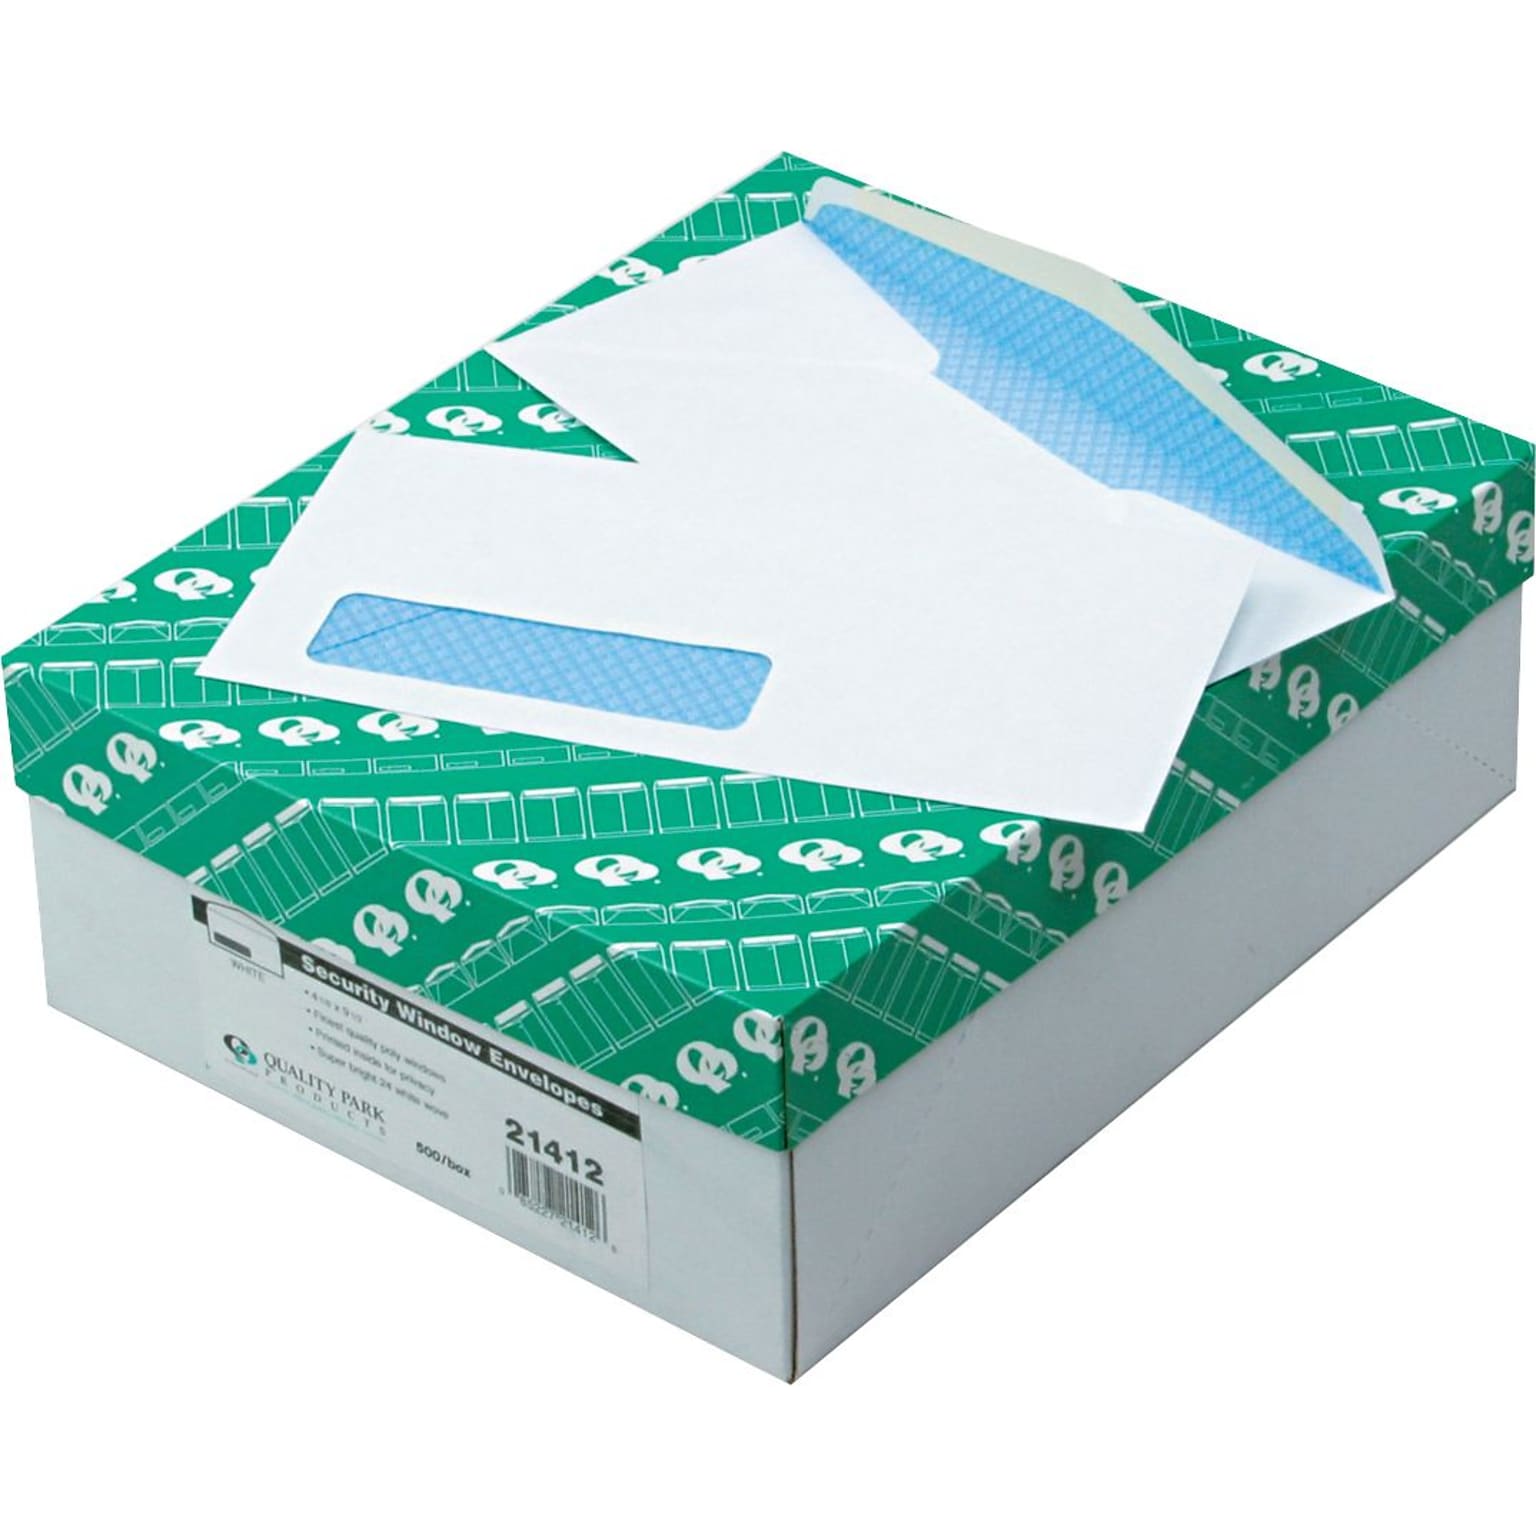 Quality Park Security Tinted #10 Window Envelope, 4 1/8 x 9 1/2, White, 500/Box (21412)